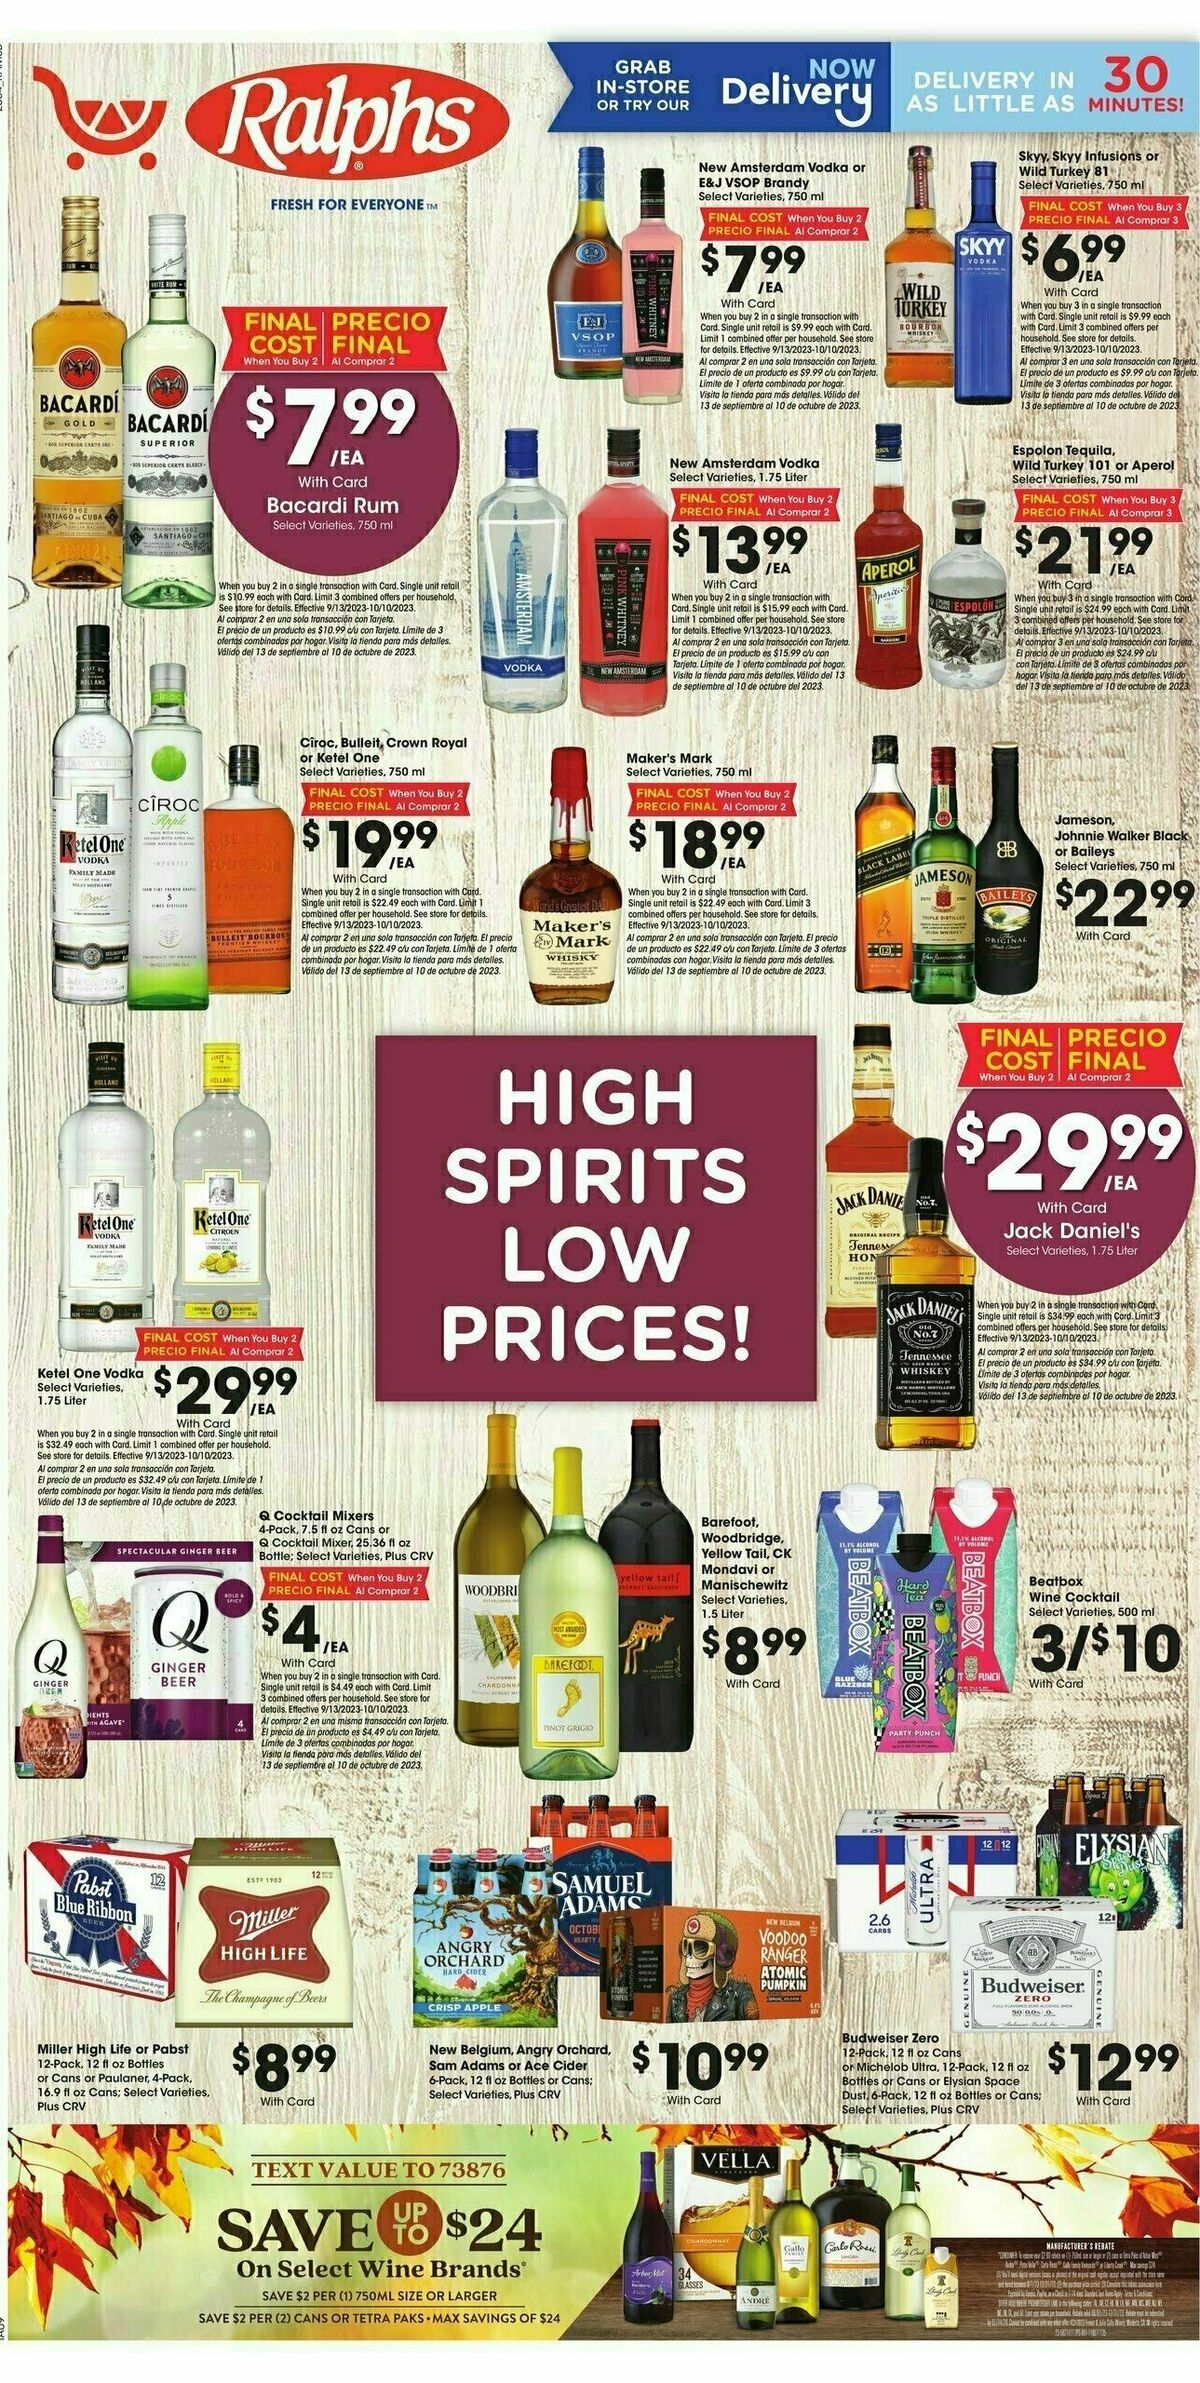 Ralphs High Spirits Low Prices Weekly Ad from September 13